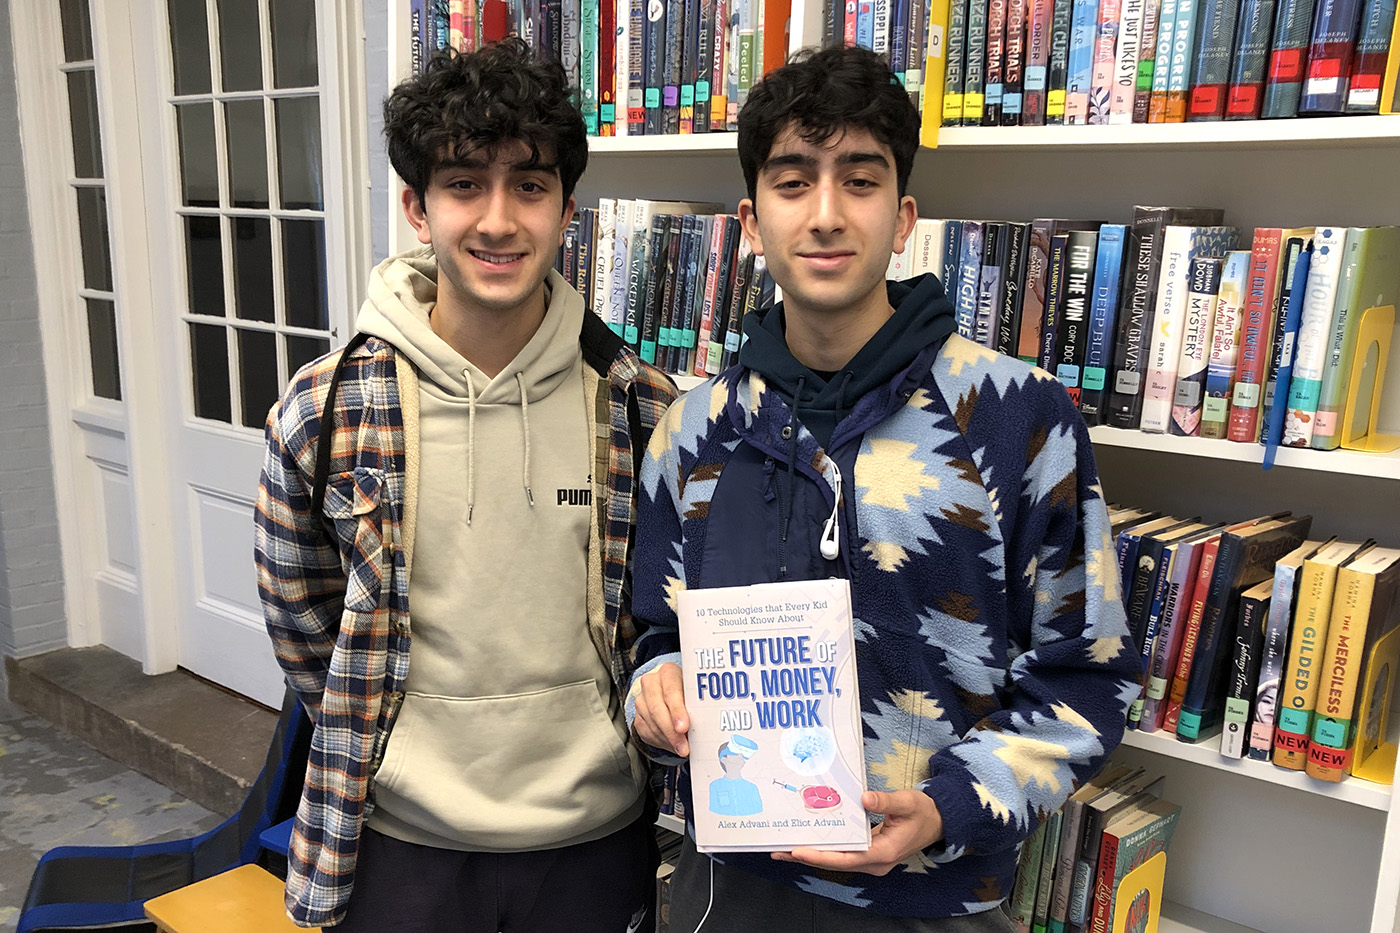 A photo of Alex and Eliot Advani posing while holding their book. Books line a series of shelves behind them.